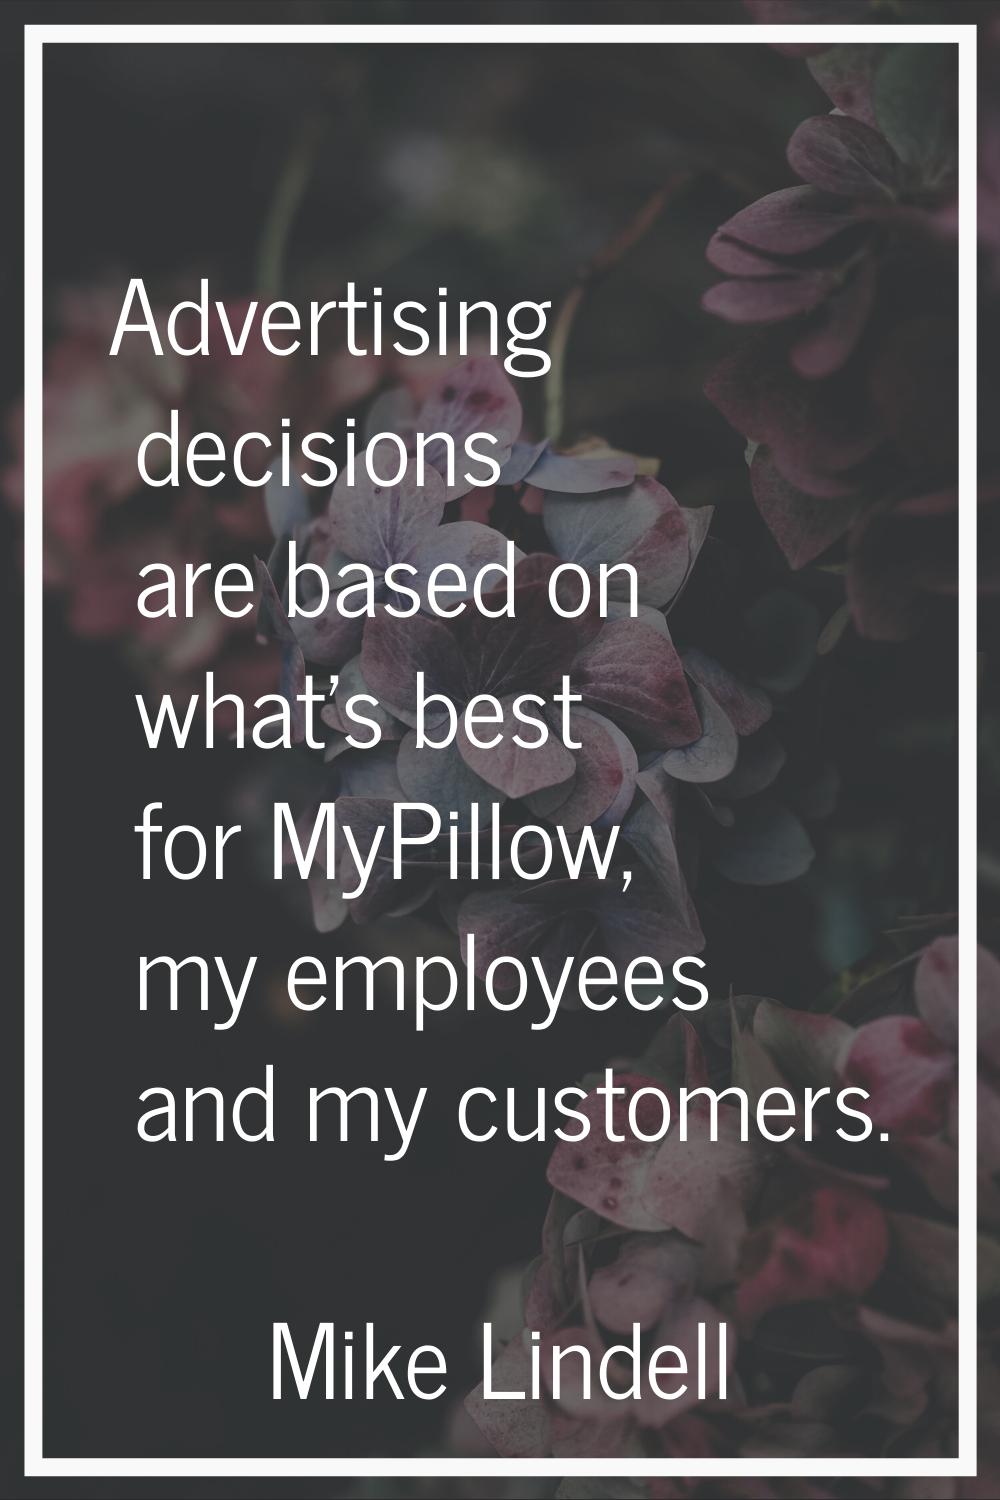 Advertising decisions are based on what's best for MyPillow, my employees and my customers.